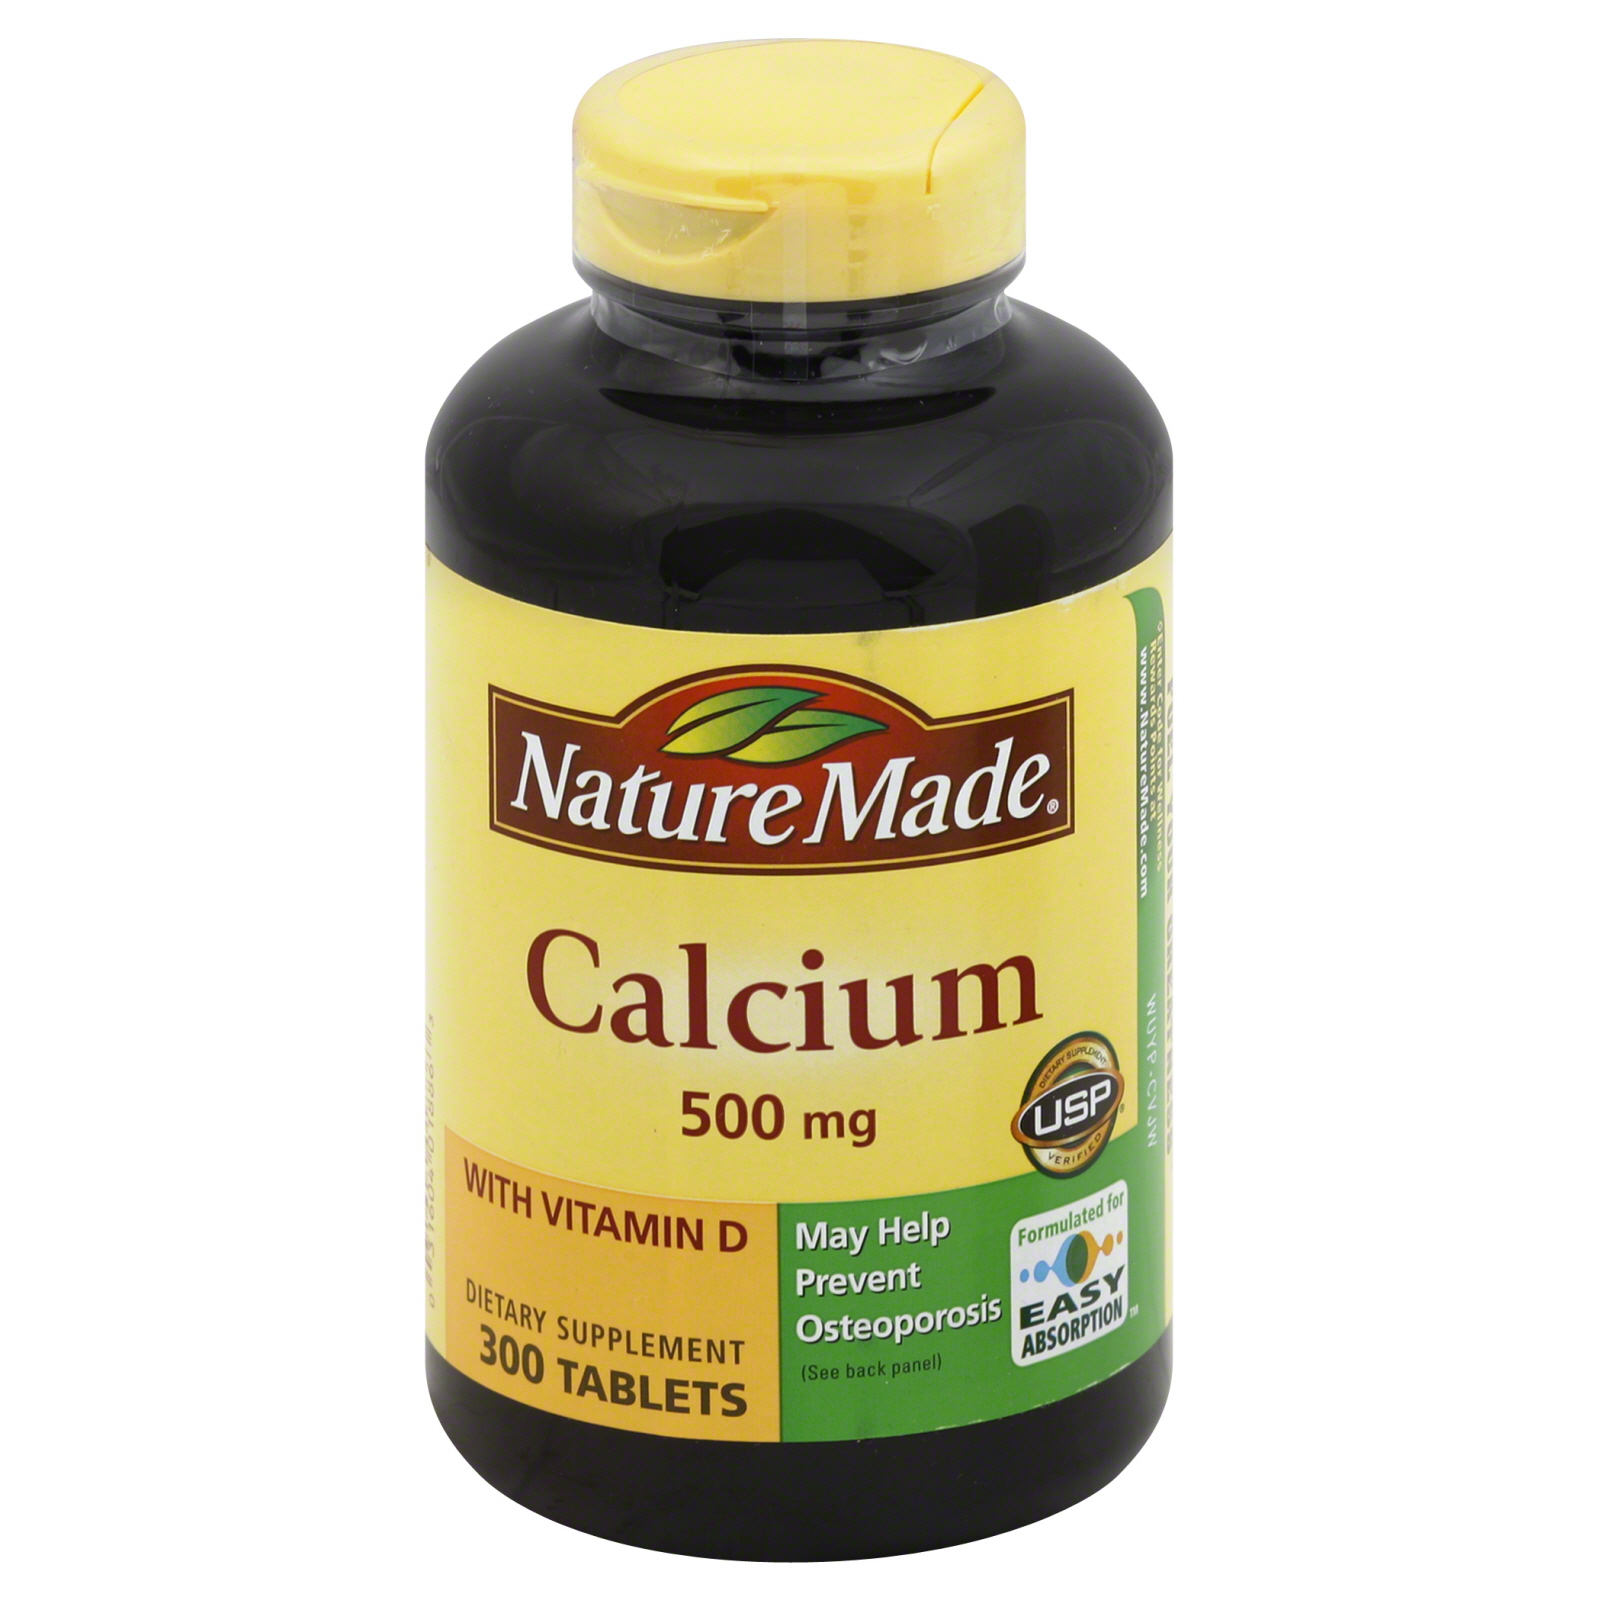 Nature Made Calcium 500 mg, with Vitamin D3 for Immune Support, Tablets, 300 Count, Value Size, helps support Bone Strength - 031604018863